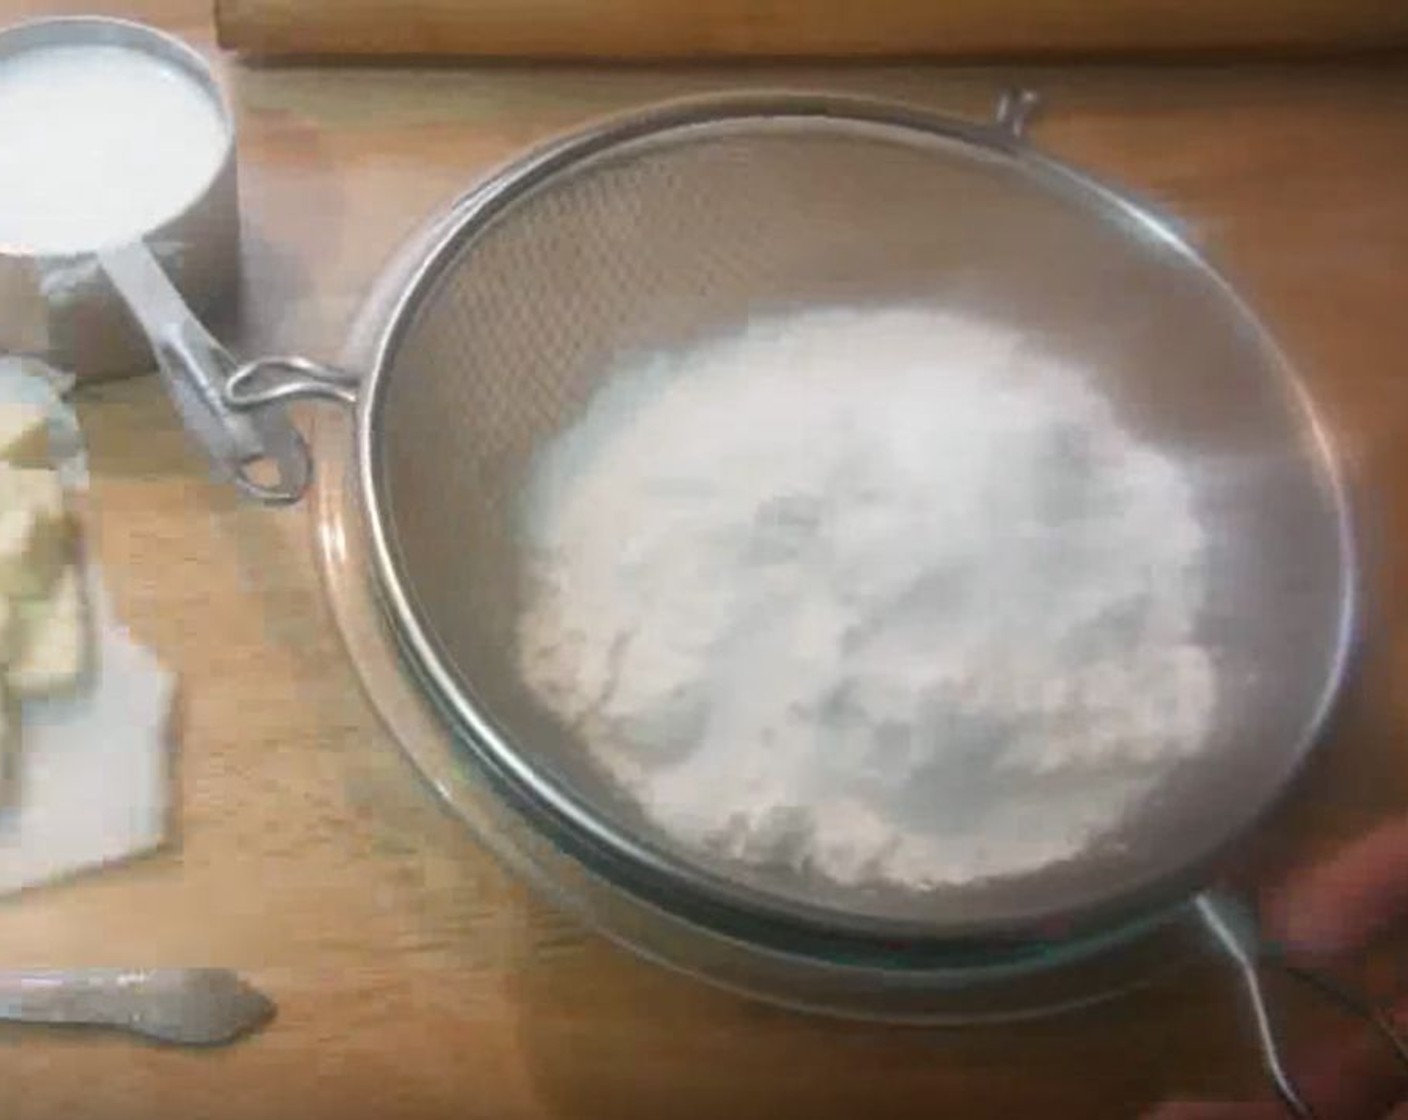 step 2 In a mixing bowl, sift together All-Purpose Flour (1 3/4 cups), Salt (1/2 tsp), and Baking Powder (1 Tbsp).